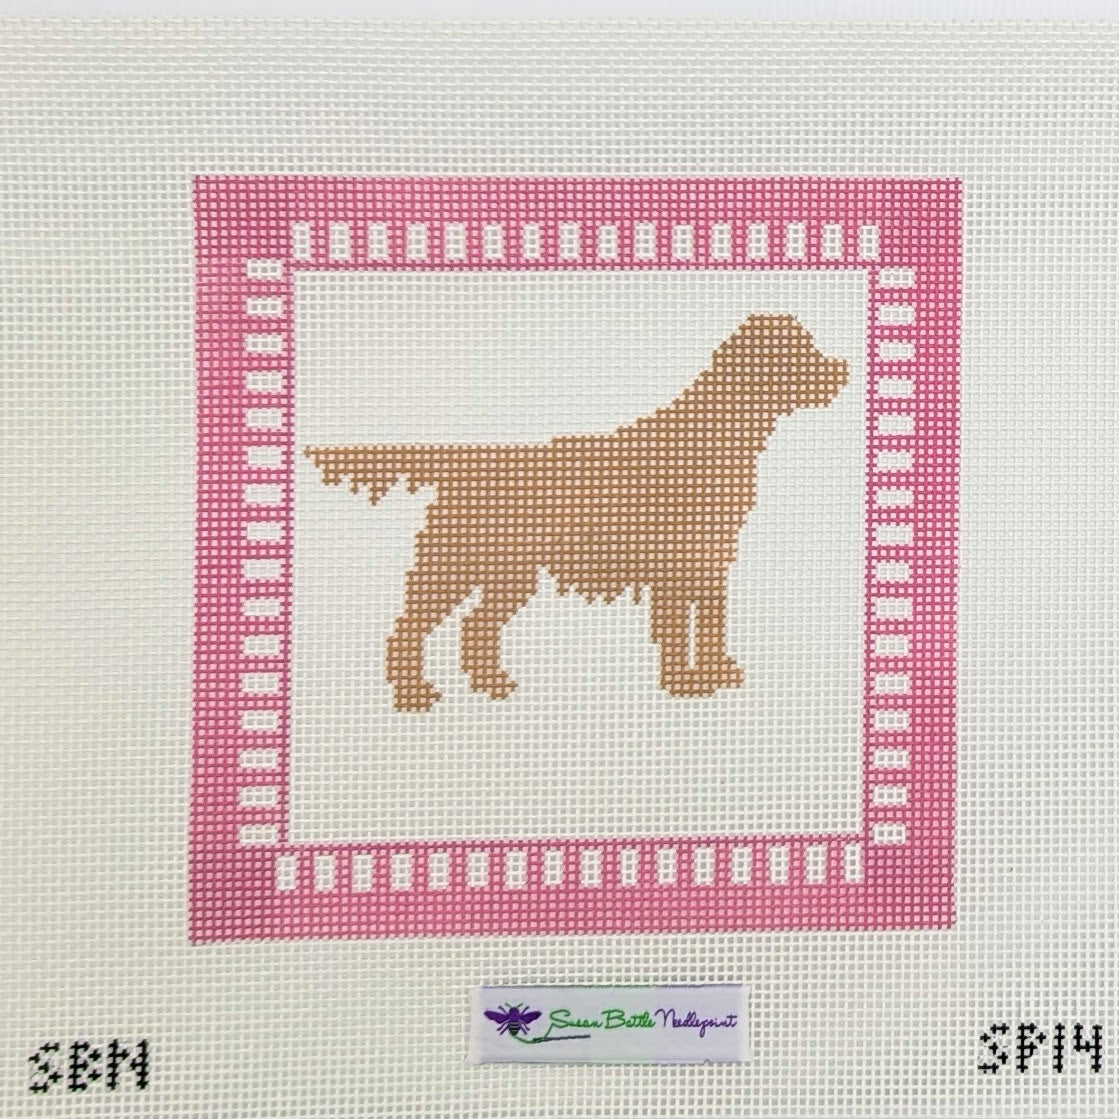 Golden Retriever with Pink Border (on 10 Mesh)